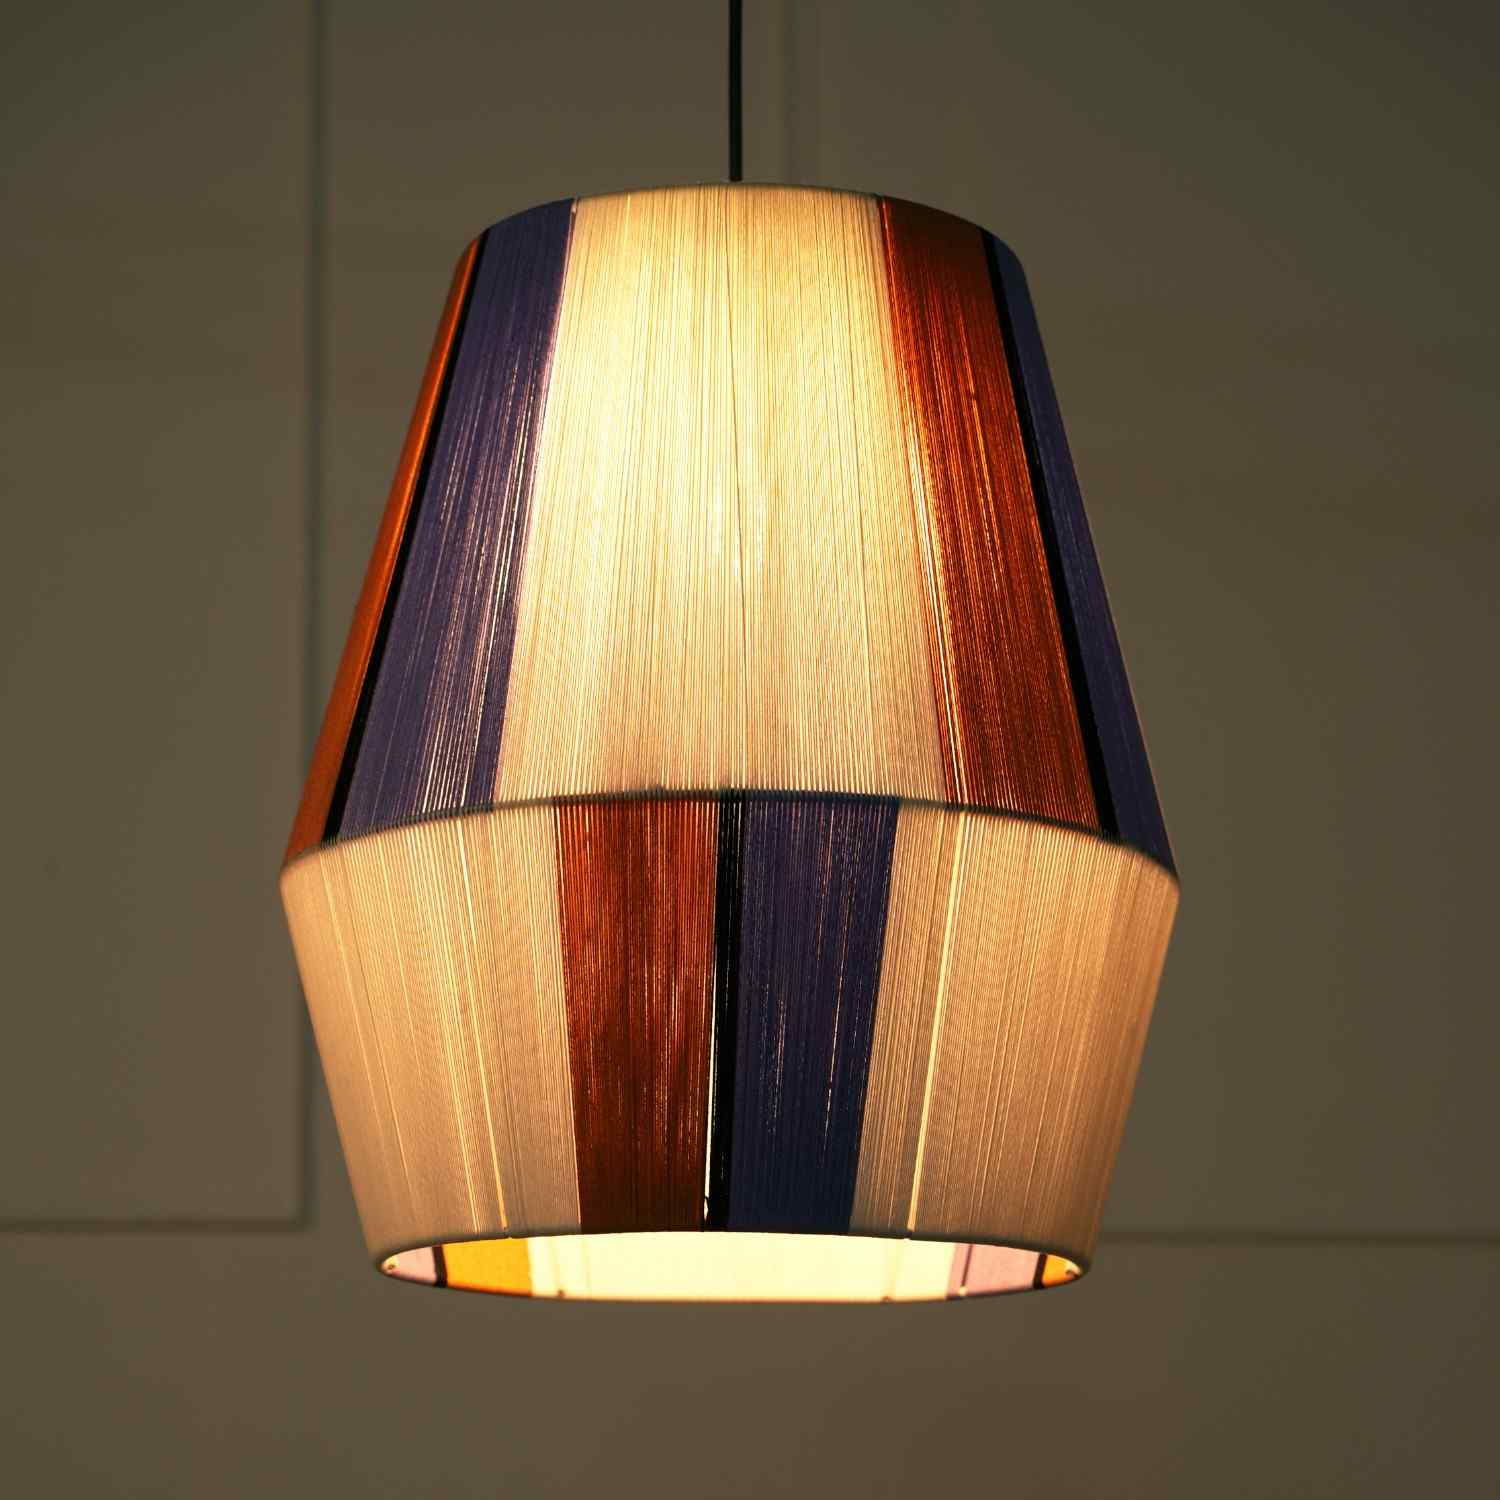 Colour Story 200 - Limited Edition Threading Pattern, Cotton Threading Lampshade, Sturdy Construction